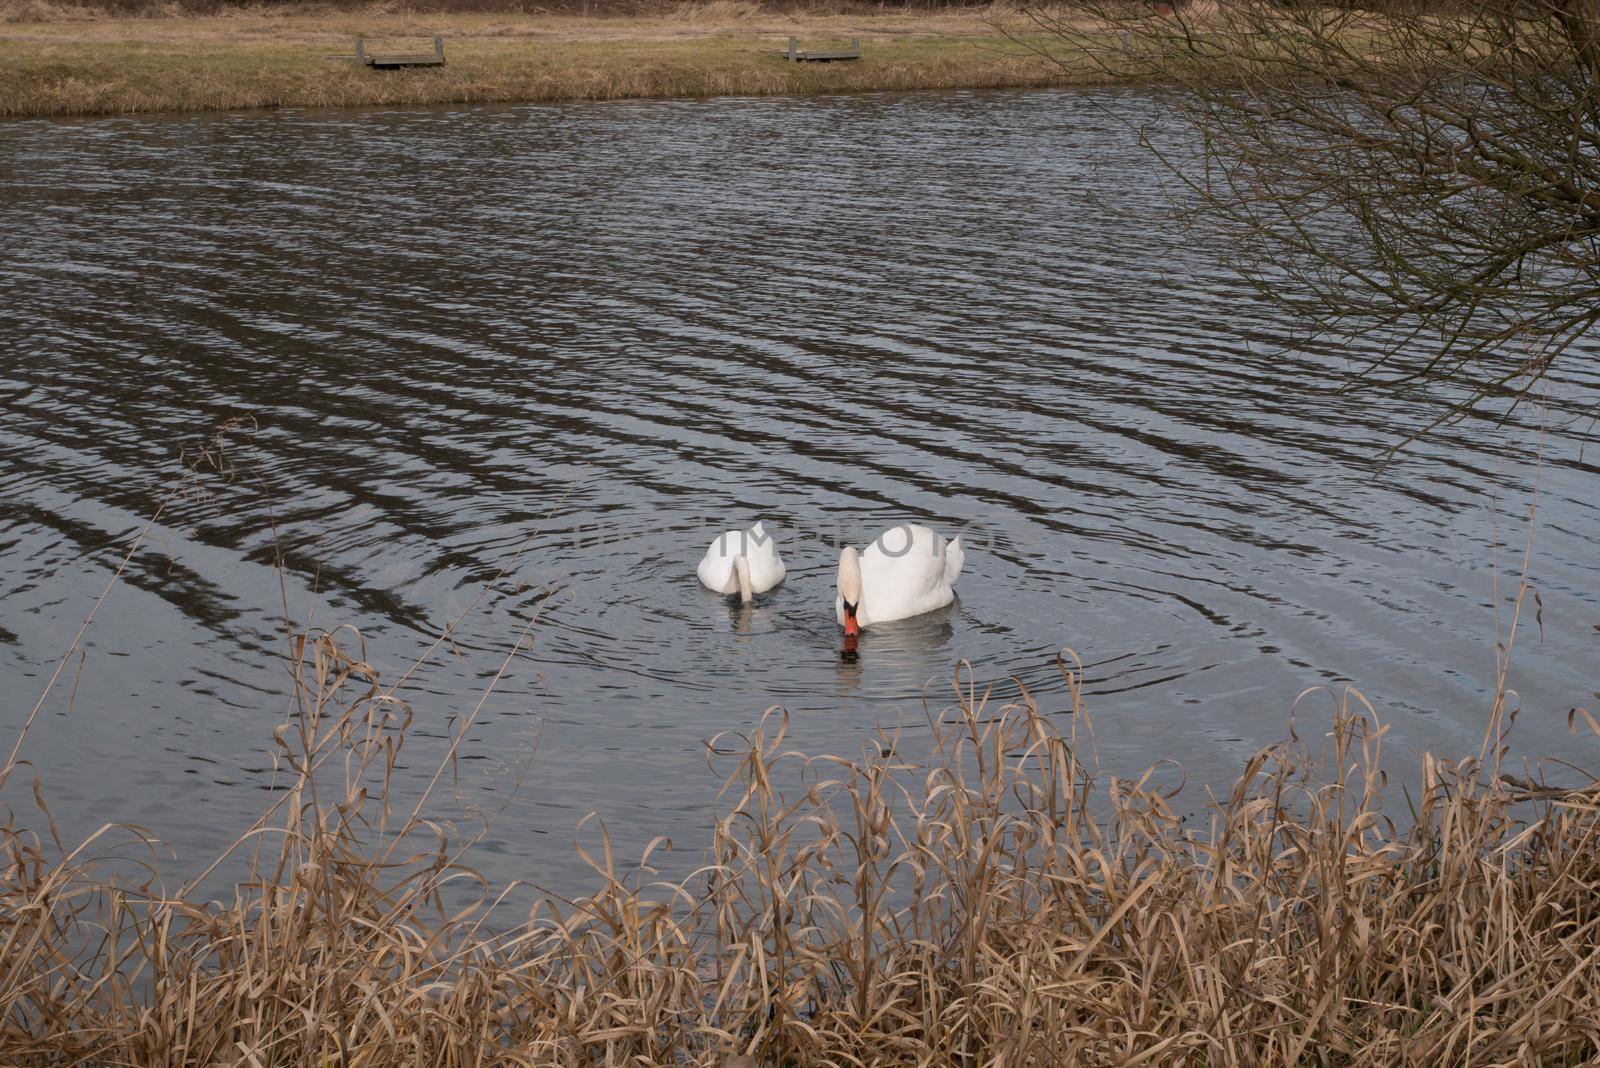 Two swans swimming in a lake. White swans swim and fish in the lake.